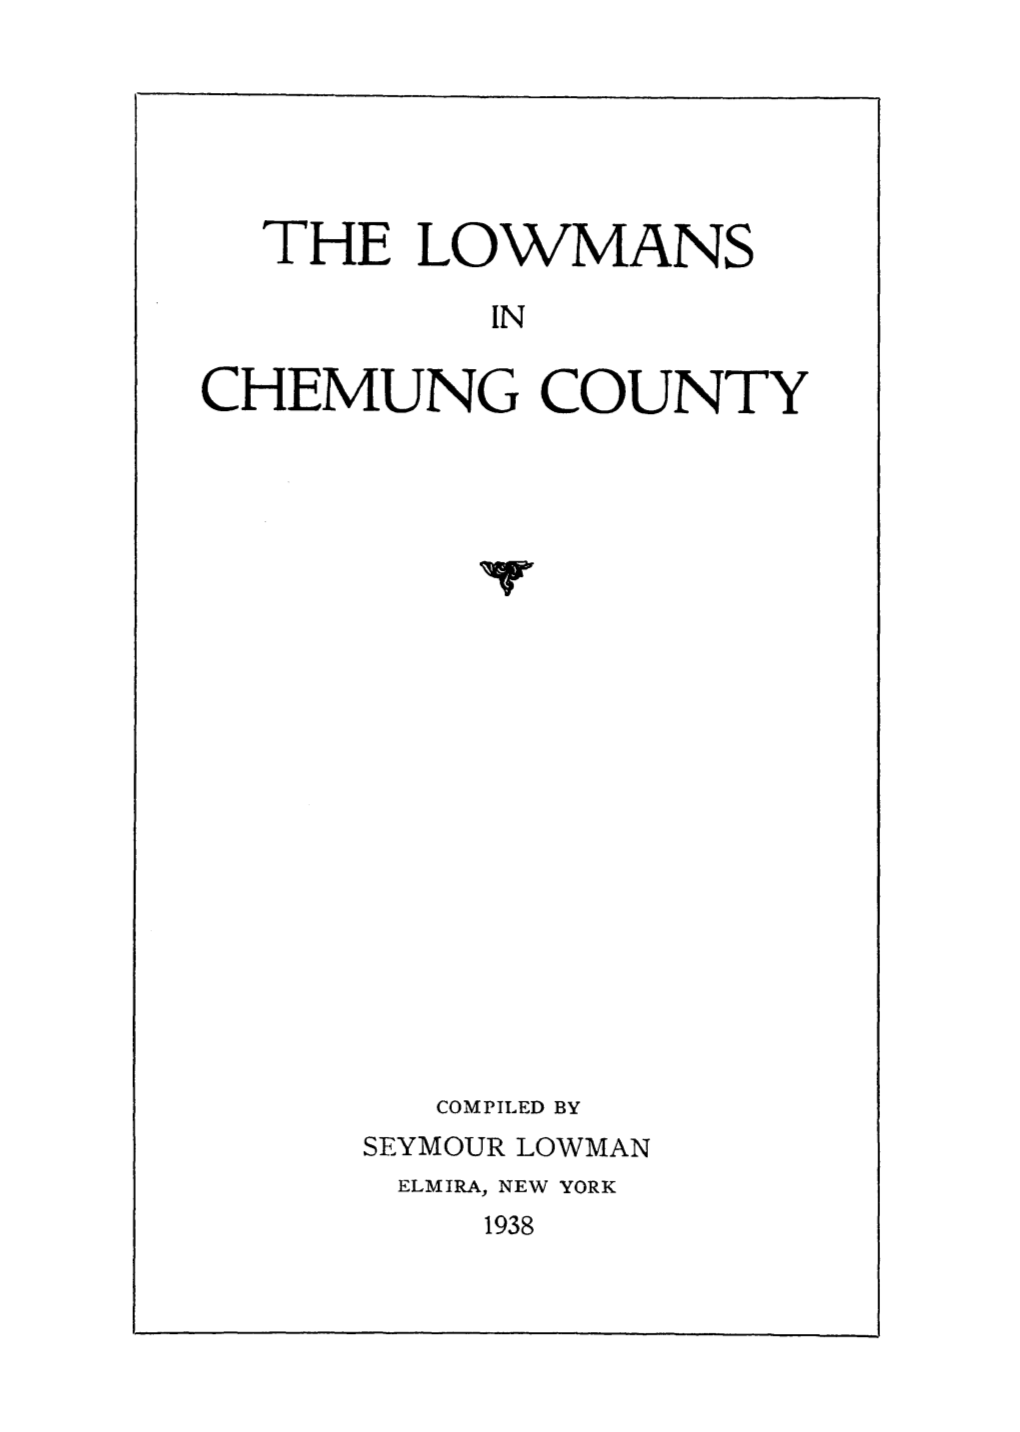 The Lowmans Chemung County